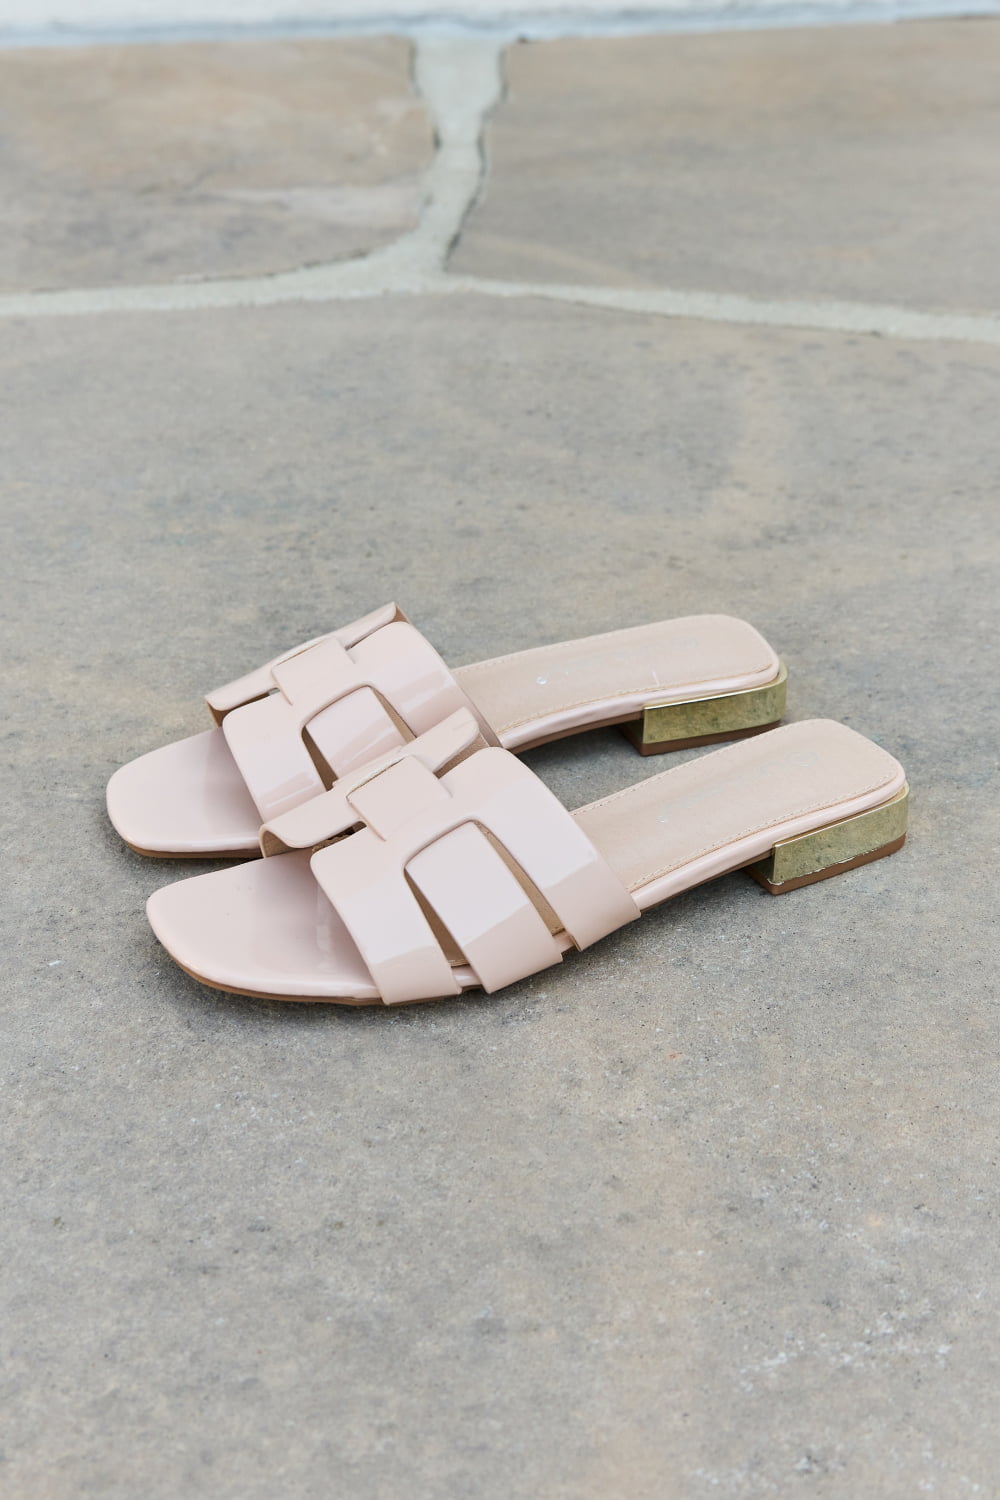 Everyday Sandals in Cream Shoes RYSE Clothing Co.   